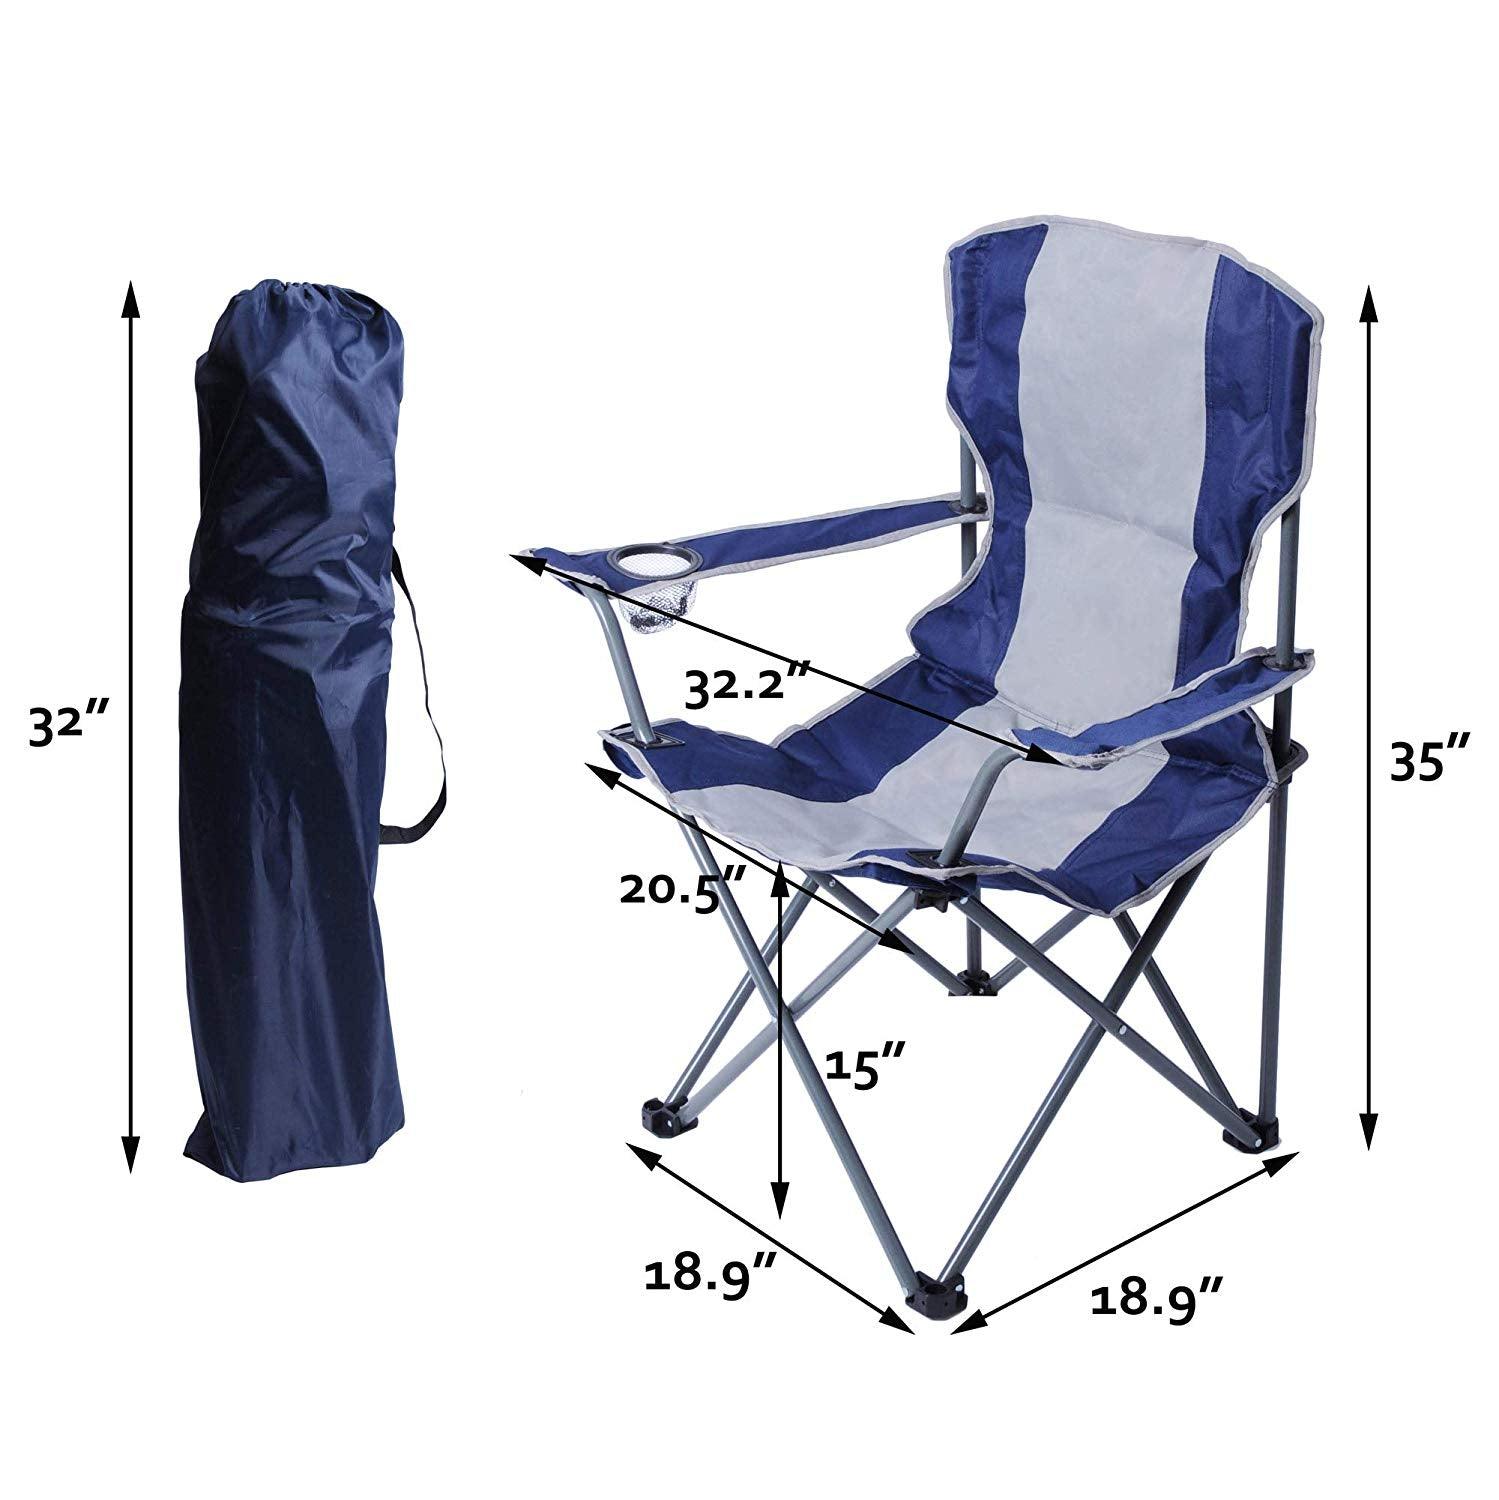 Bosonshop Canopy Camping Chair Folding Durable Outdoor Patio Seat with Cup Holder, Blue